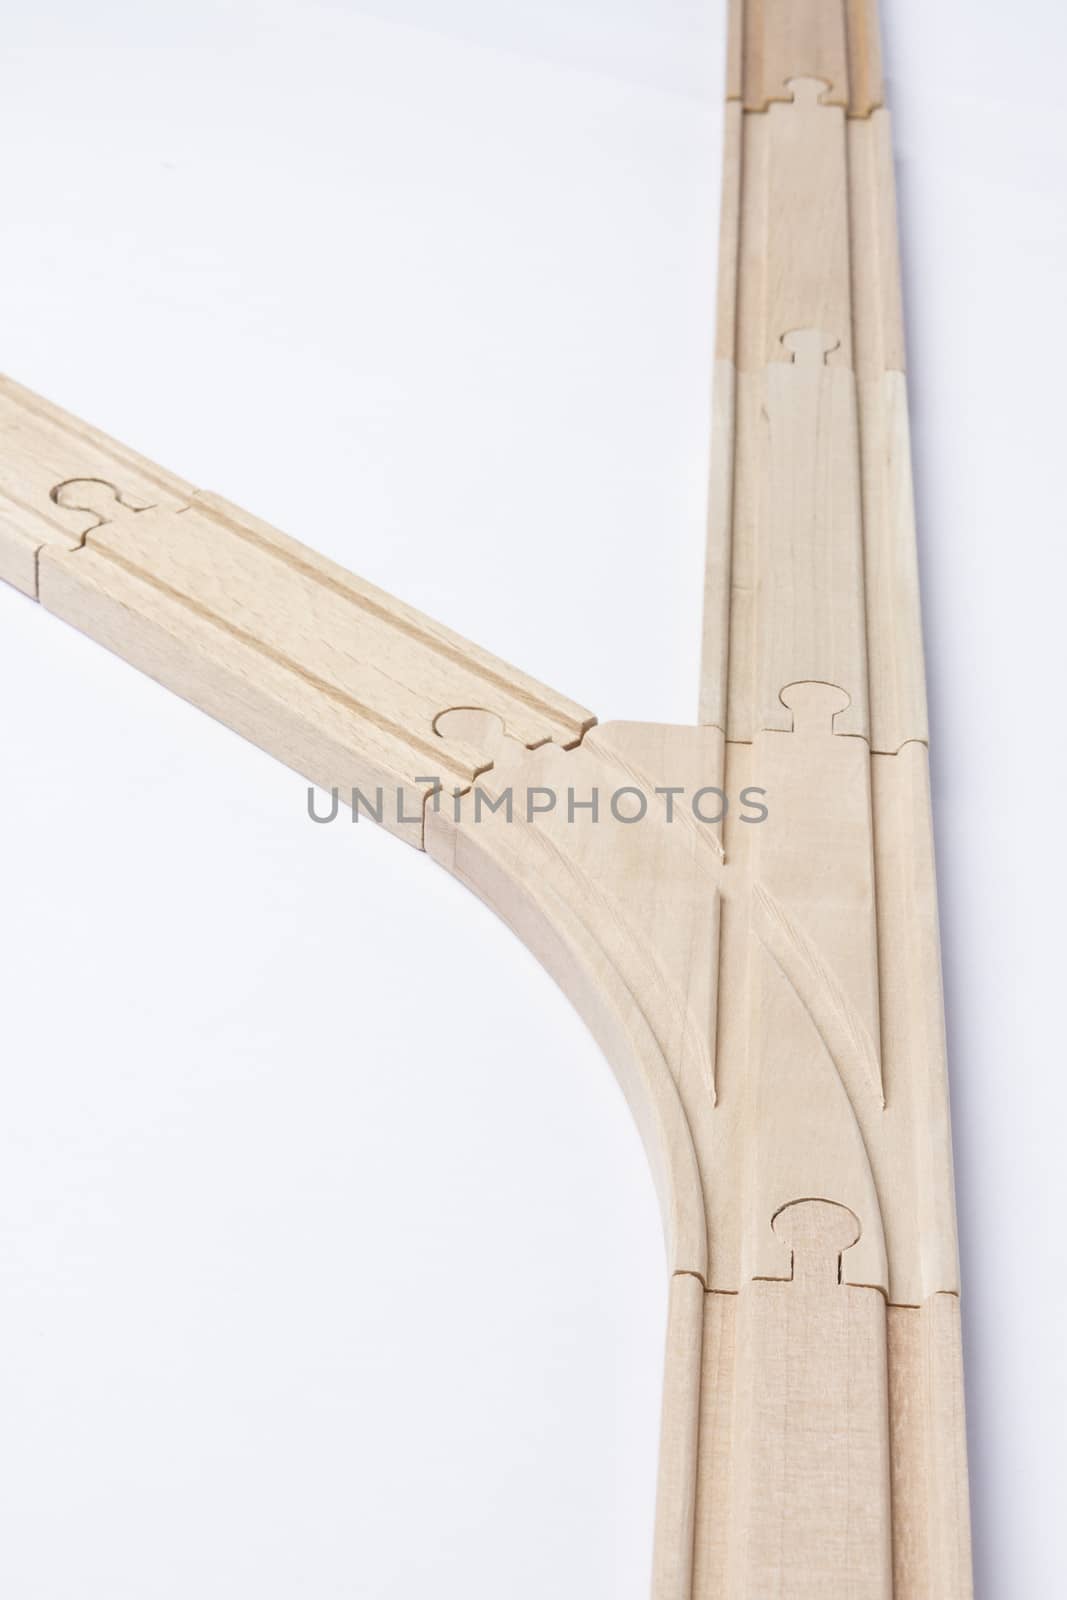 forked wooden railroad track on grey background. vertical image